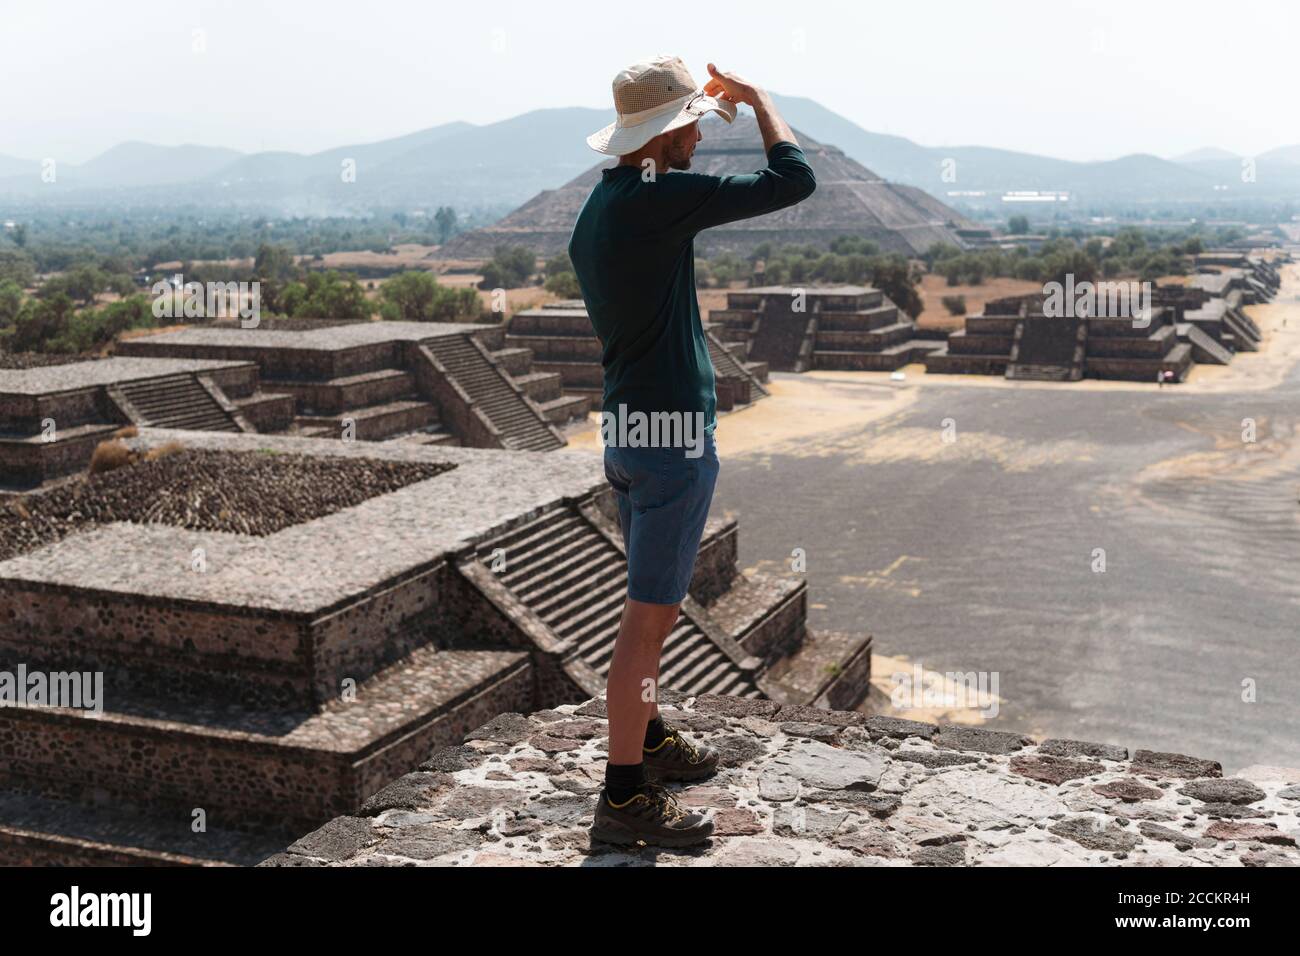 Mature man wearing hat standing on pyramid against sky in Teotihuacan, Mexico Stock Photo